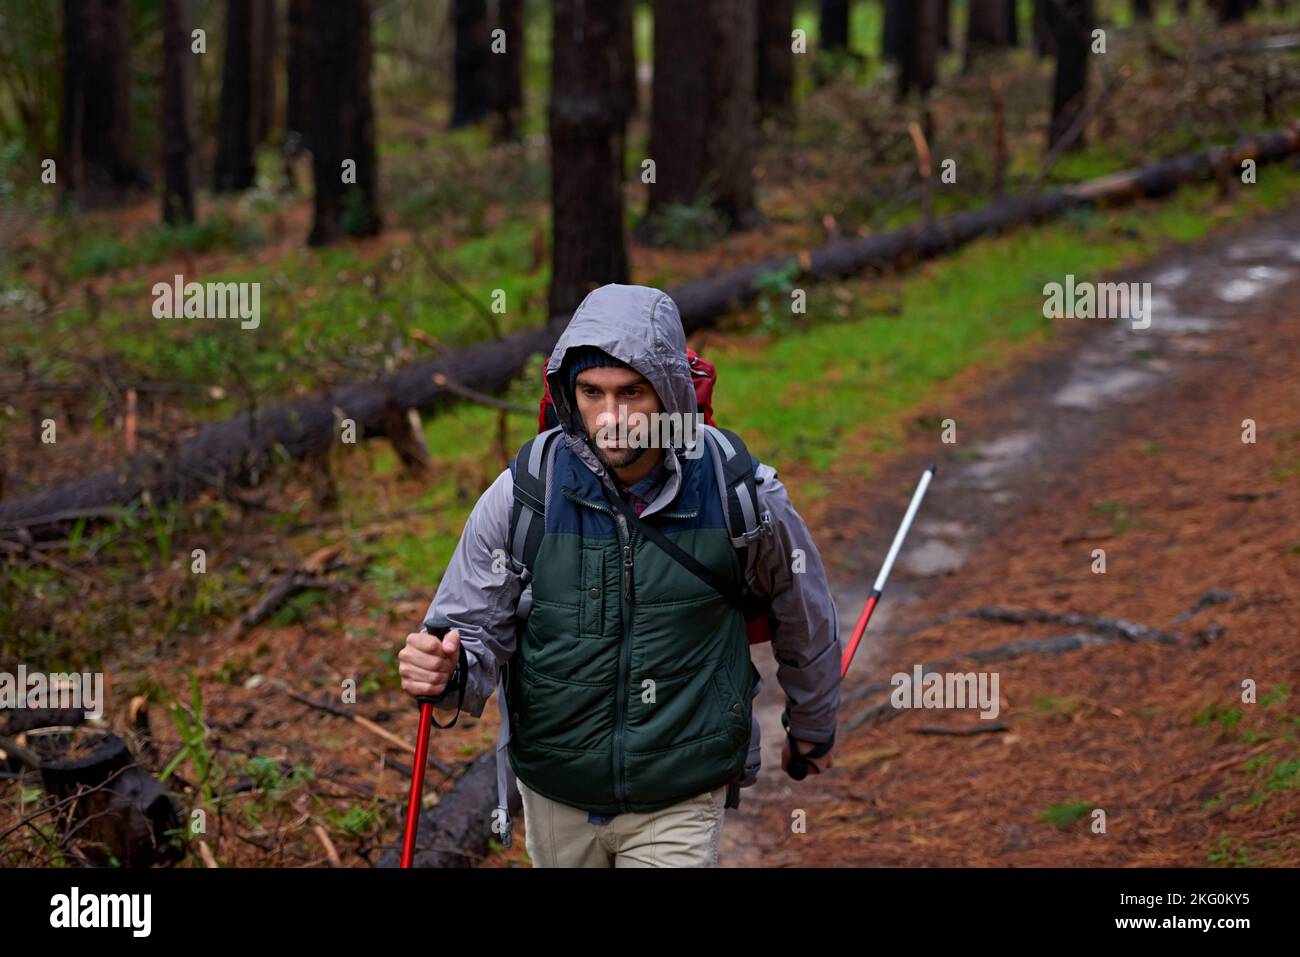 Nordic walking in natural wilderness. a handsome man hiking in a pine forest using nordic walking poles. Stock Photo